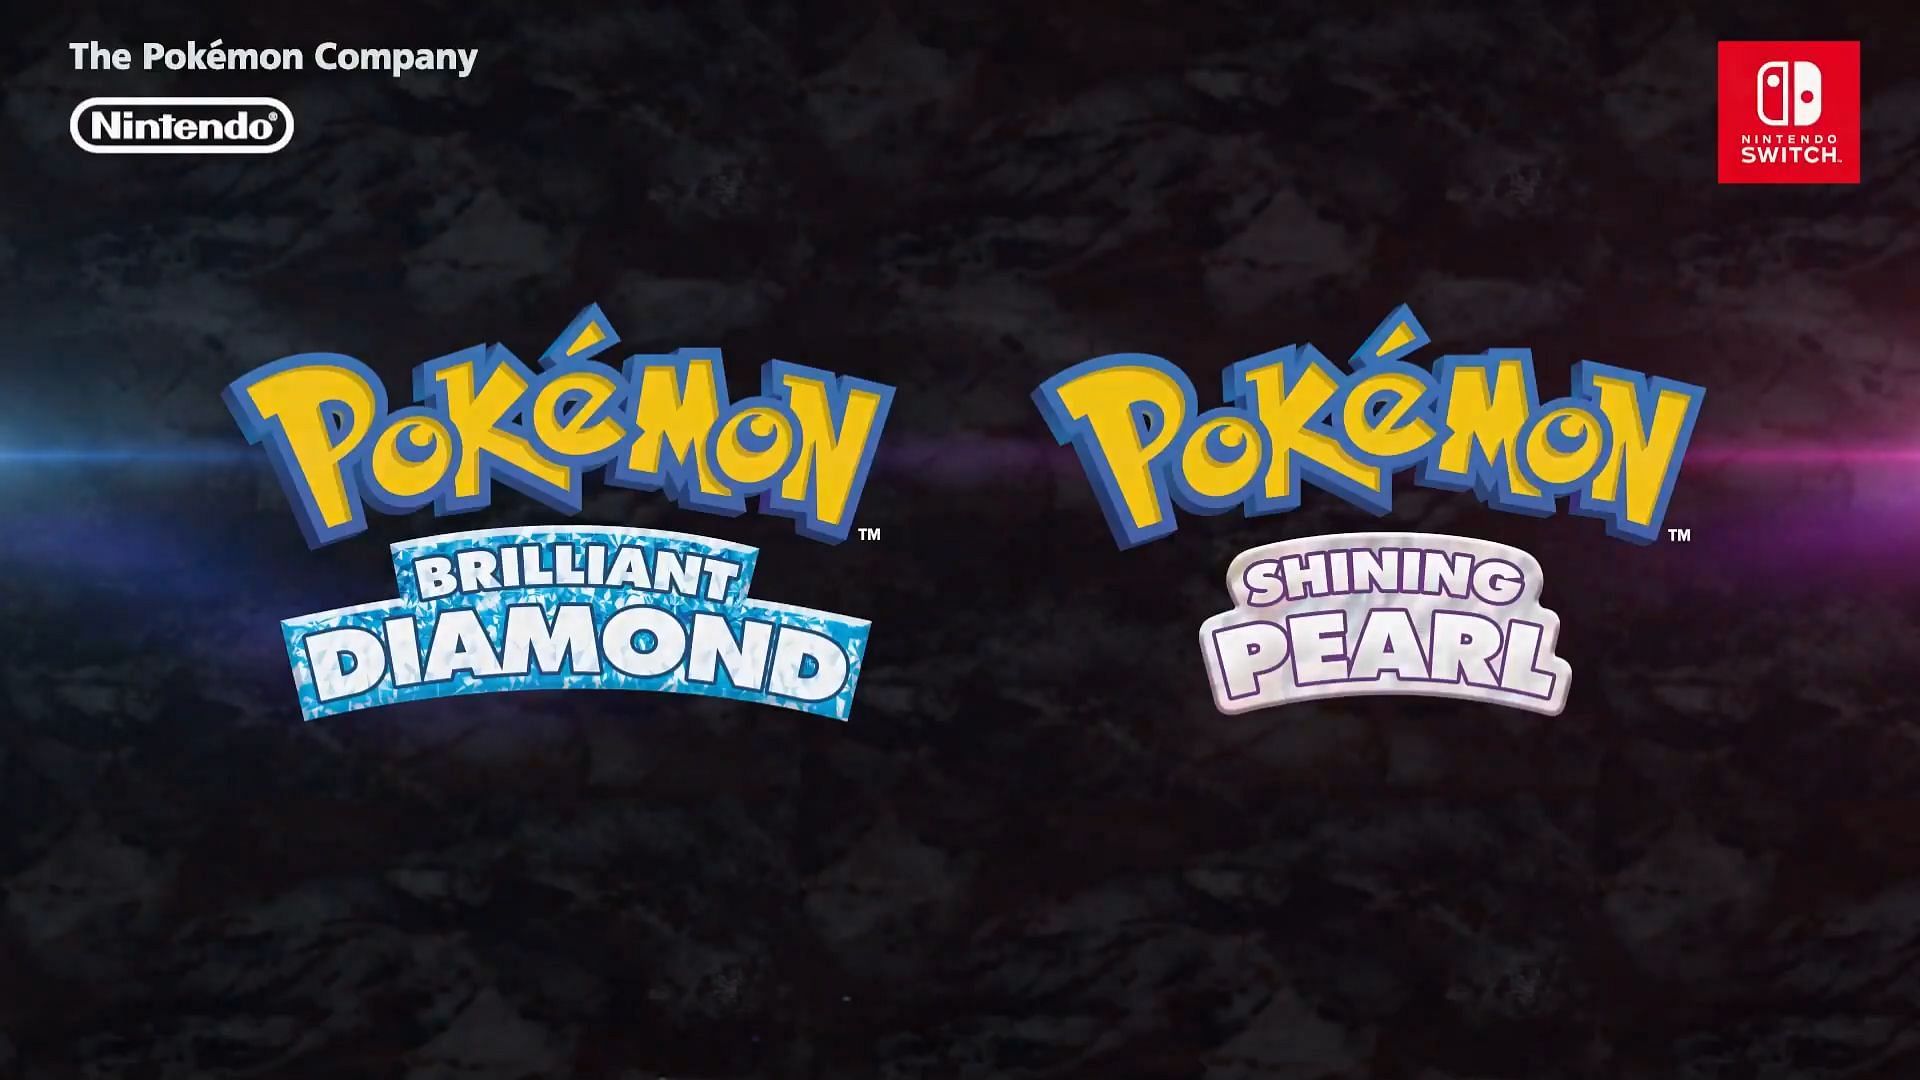 The Differences Between 'Pokémon Brilliant Diamond' and 'Shining Pearl